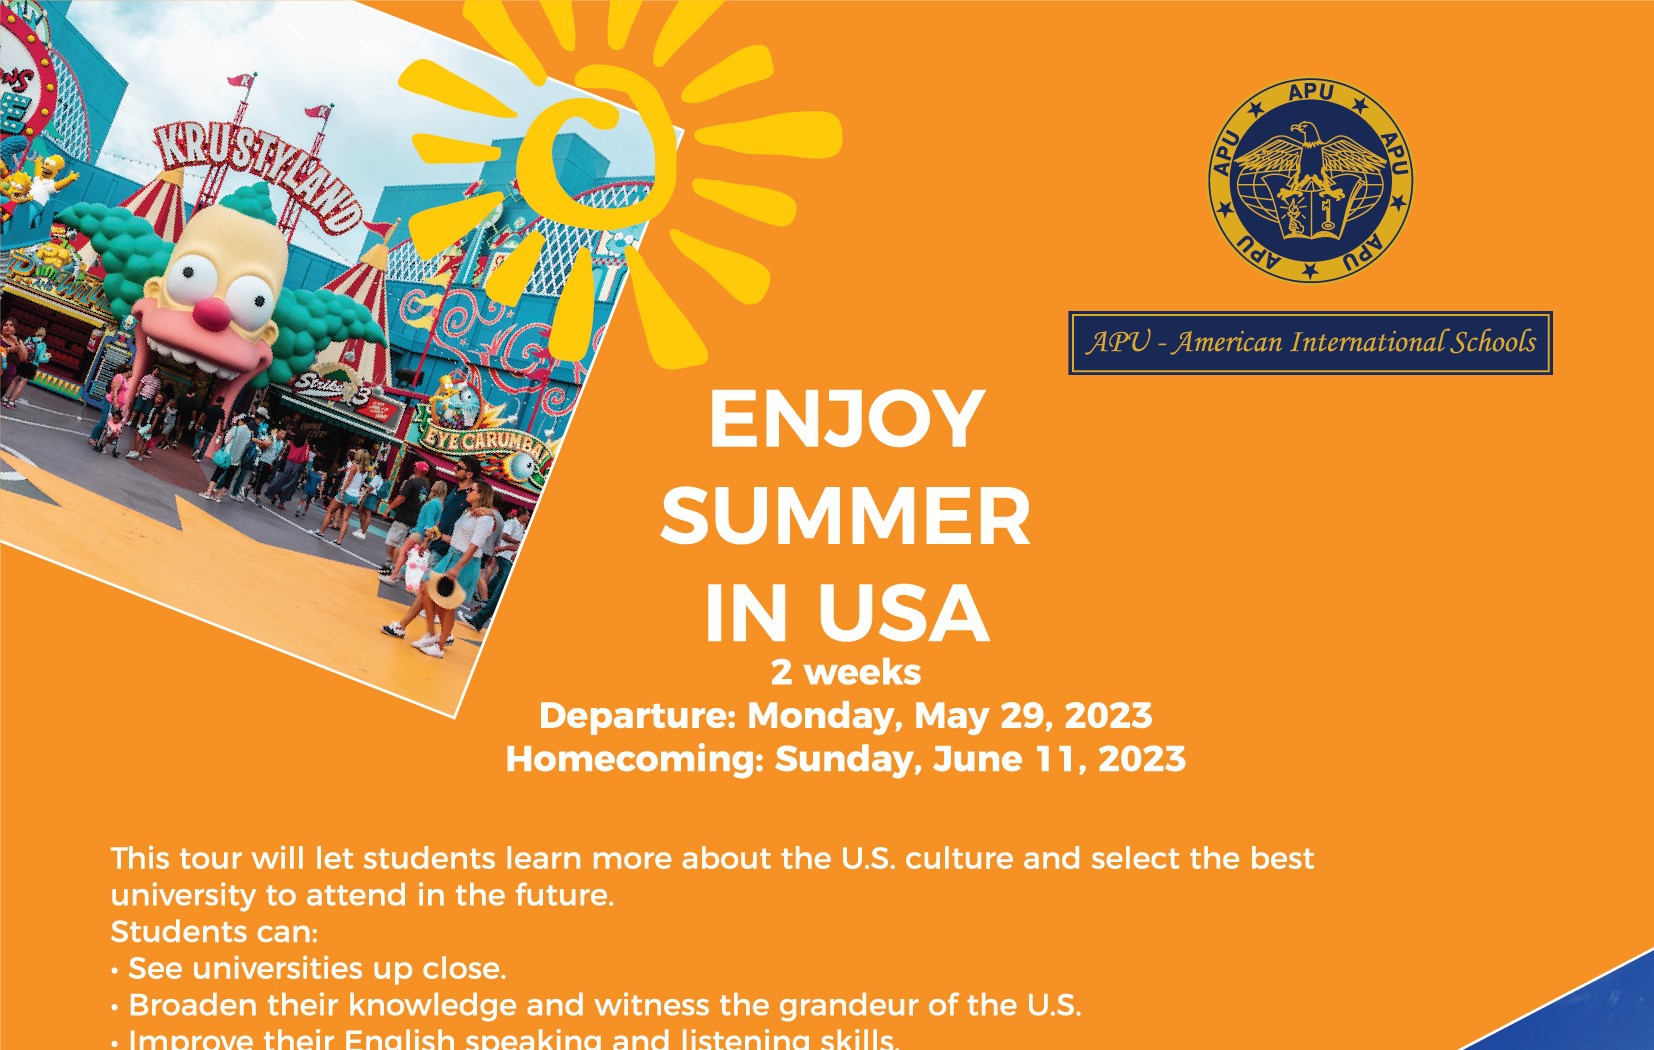 ENJOY YOUR SUMMER 2023 IN USA WITH APU & AUV